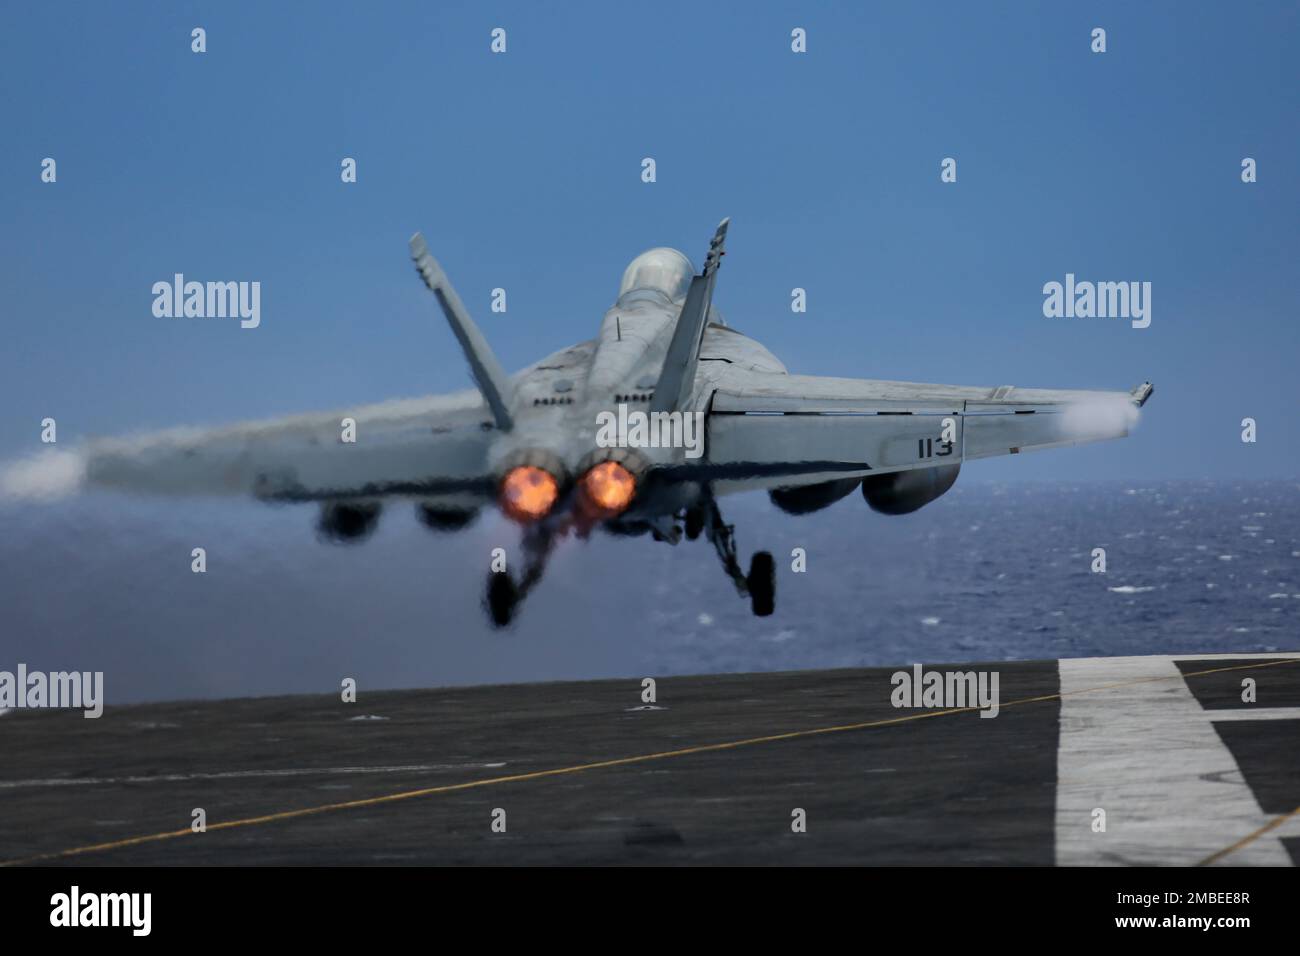 PHILIPPINE SEA (June 15, 2022) An F/A-18F Super Hornet, assigned to the 'Black Aces' of Strike Fighter Squadron (VFA) 41, launches from the flight deck of the Nimitz-class aircraft carrier USS Abraham Lincoln (CVN 72). Abraham Lincoln Strike Group is on a scheduled deployment in the U.S. 7th Fleet area of operations to enhance interoperability through alliances and partnerships while serving as a ready-response force in support of a free and open Indo-Pacific region. Stock Photo